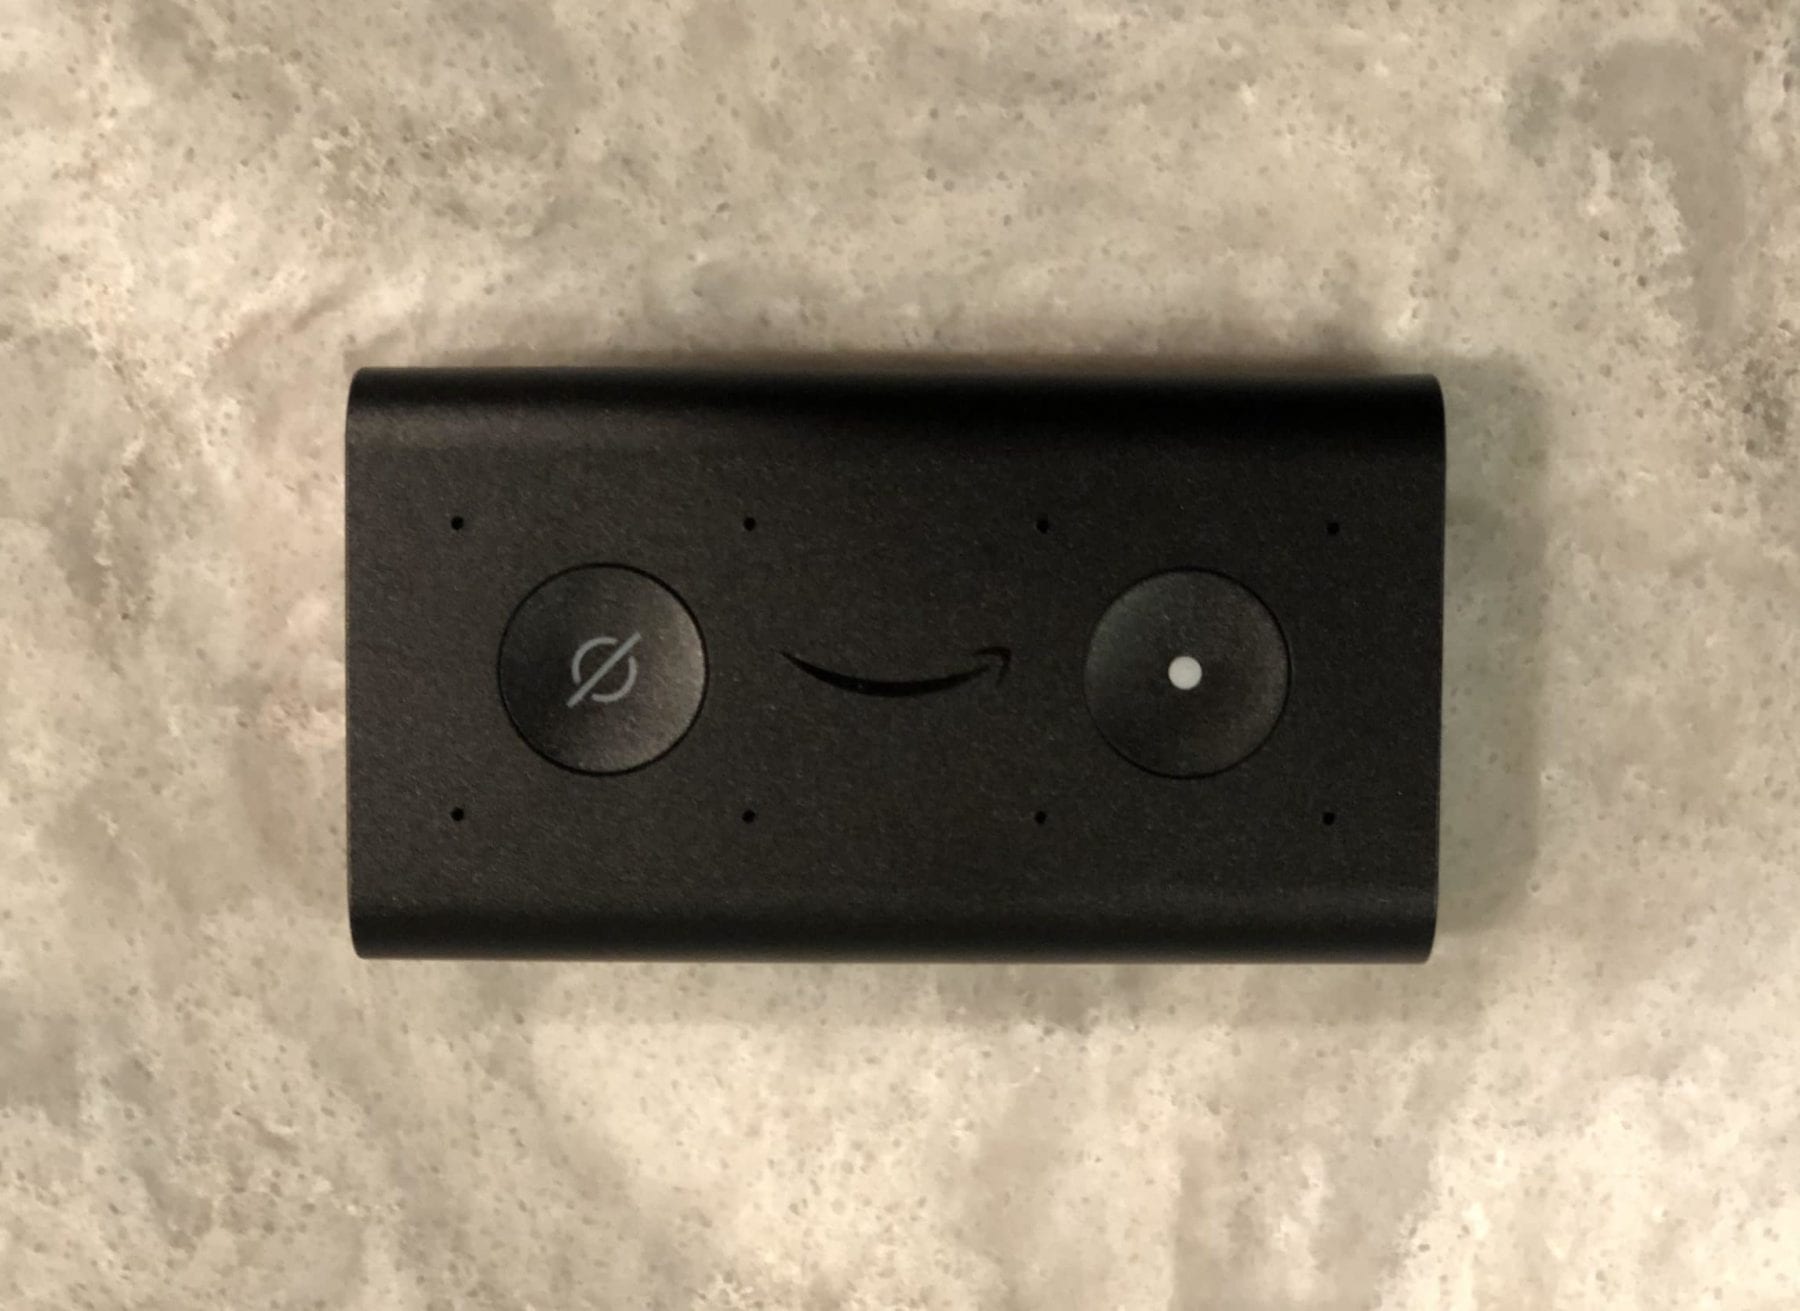 Echo Auto top view with buttons and microphones